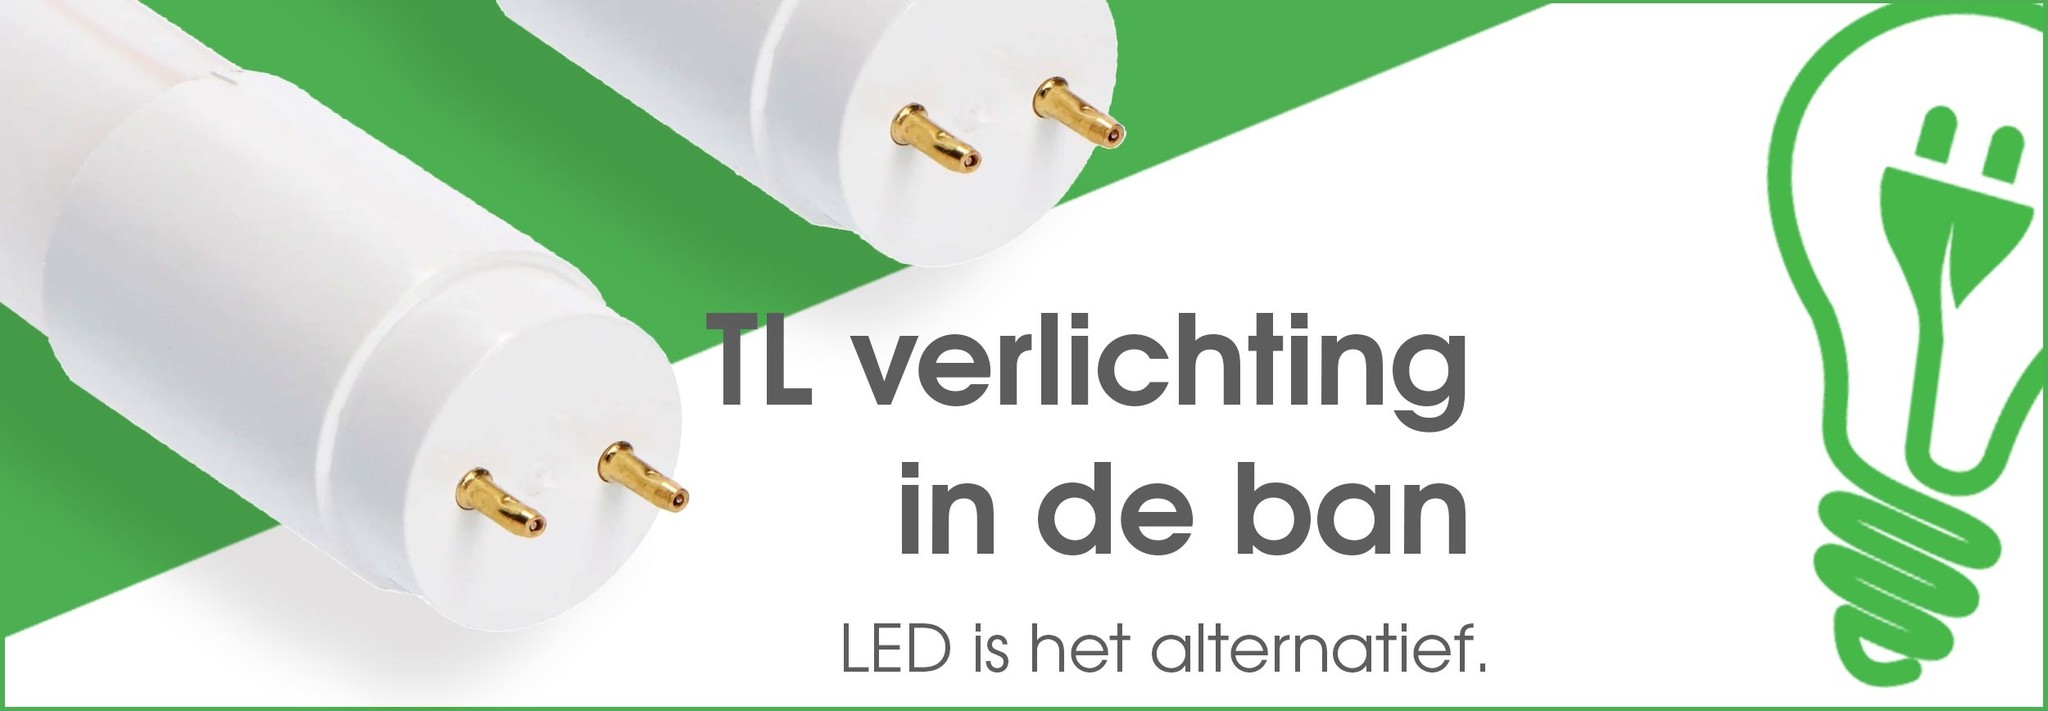 Traditionele TL verlichting in ban - Ledlichtdiscounter.nl - Ledlichtdiscounter.nl